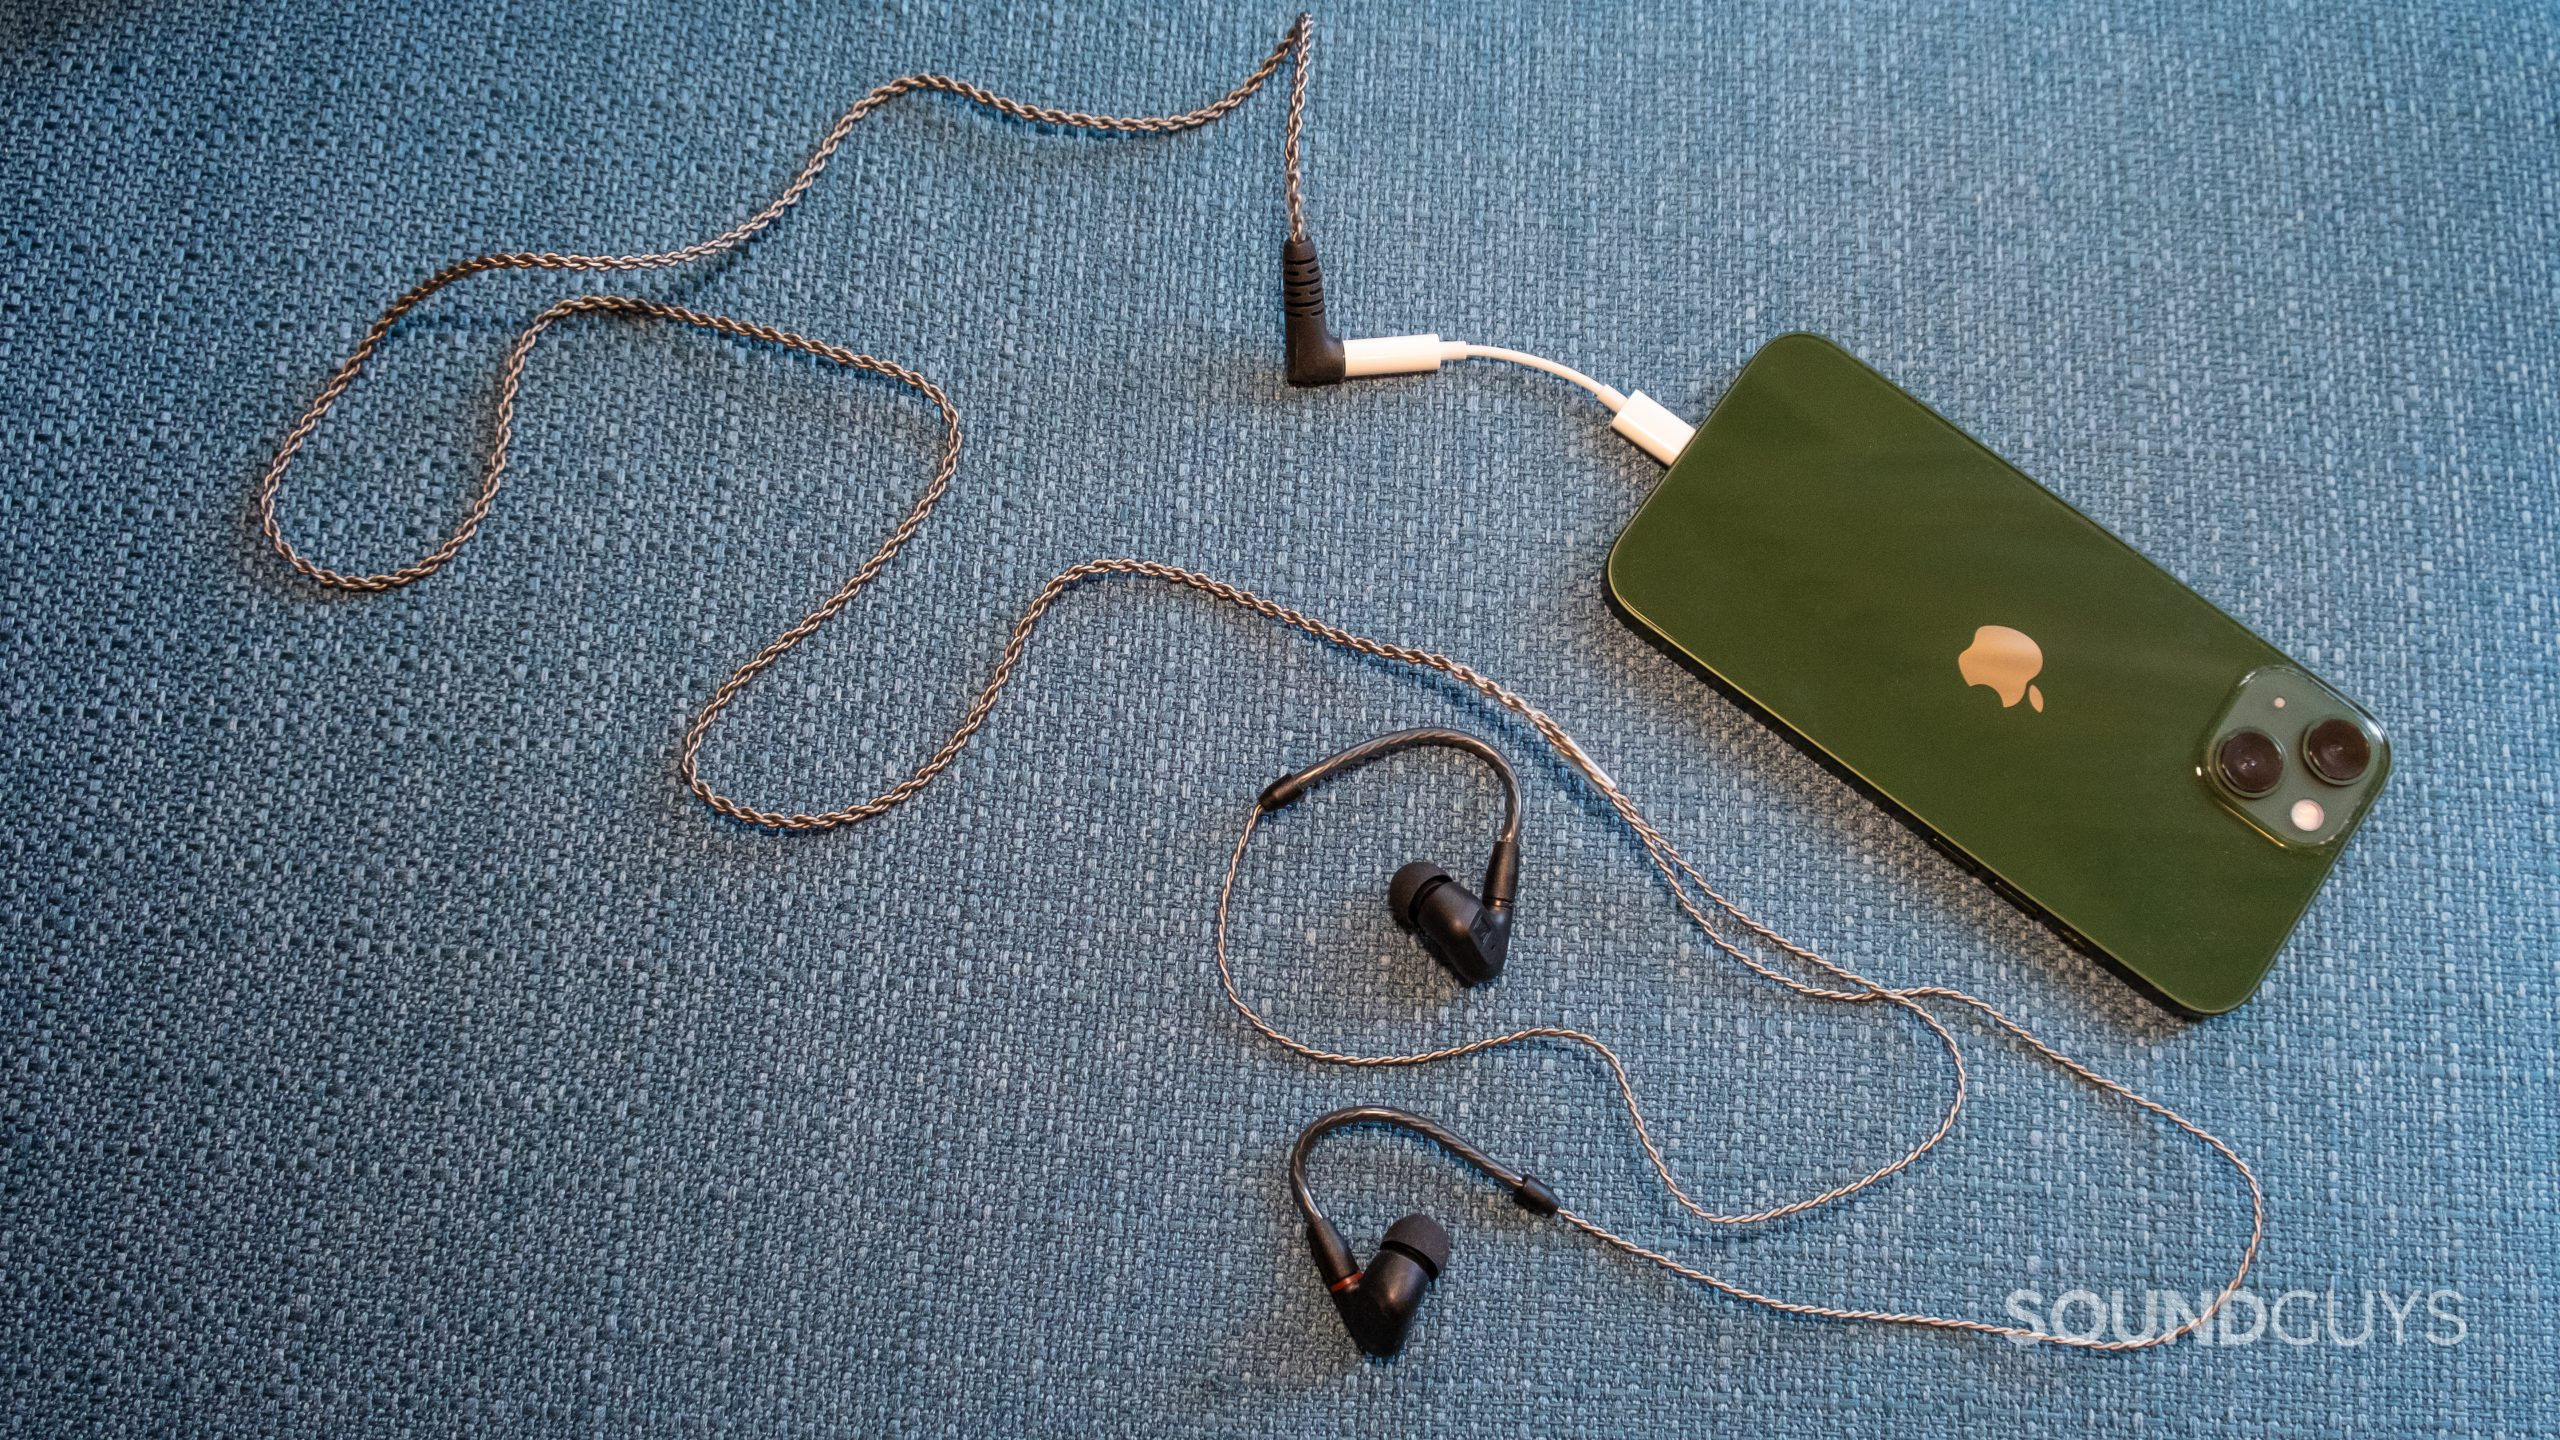 On a teal fabric surface the Sennheiser IE 200 is plugged into an Apple iPhone via a dongle.